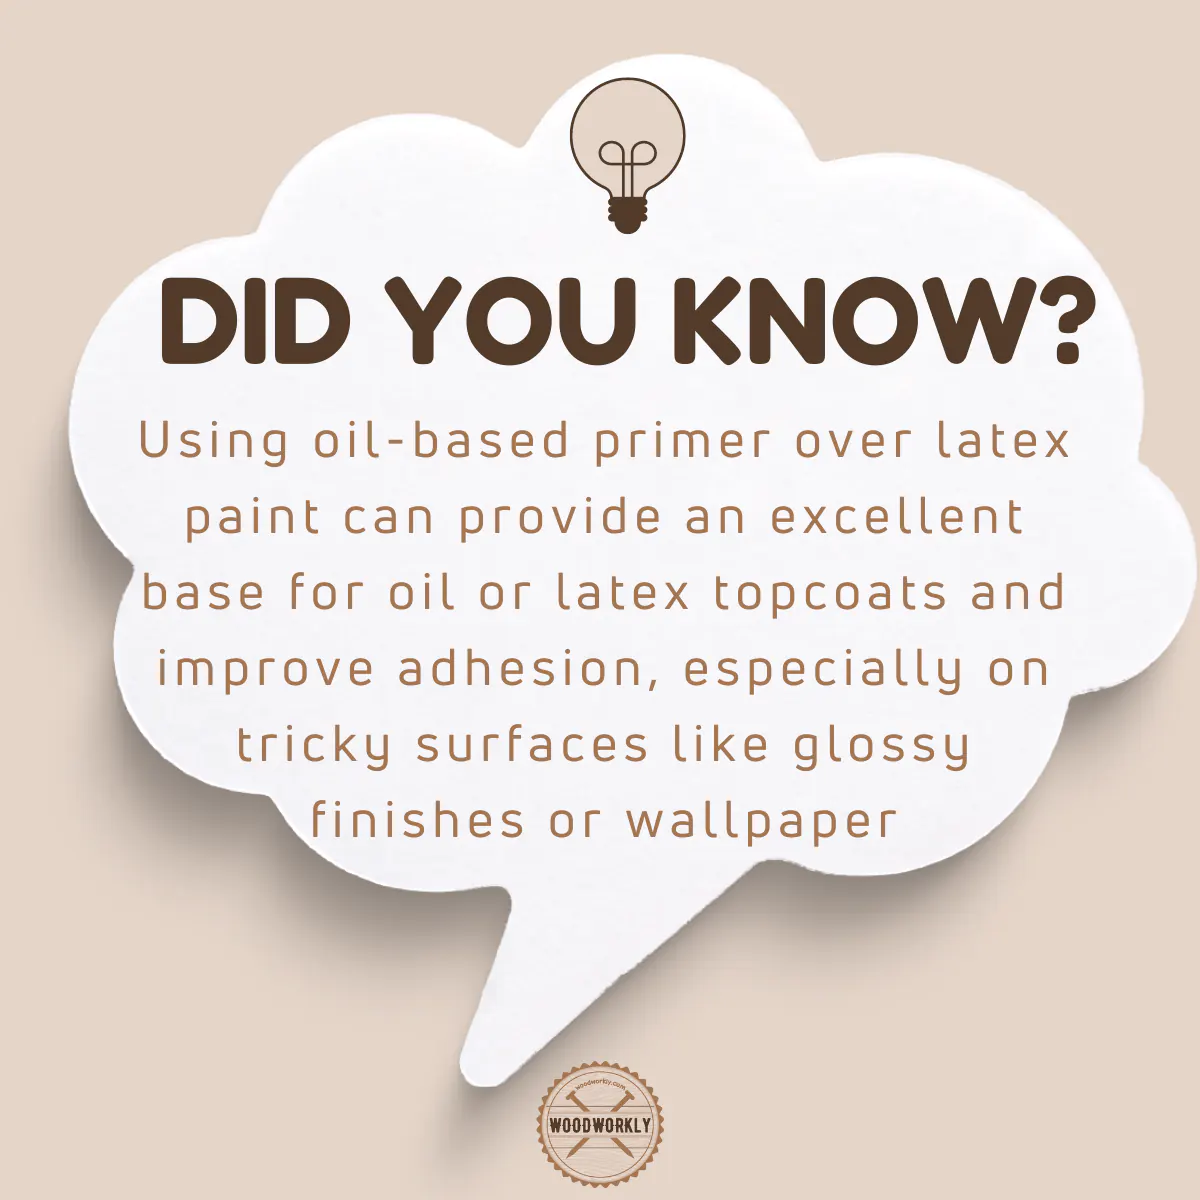 Did you know fact about using oil-based primer over latex paint